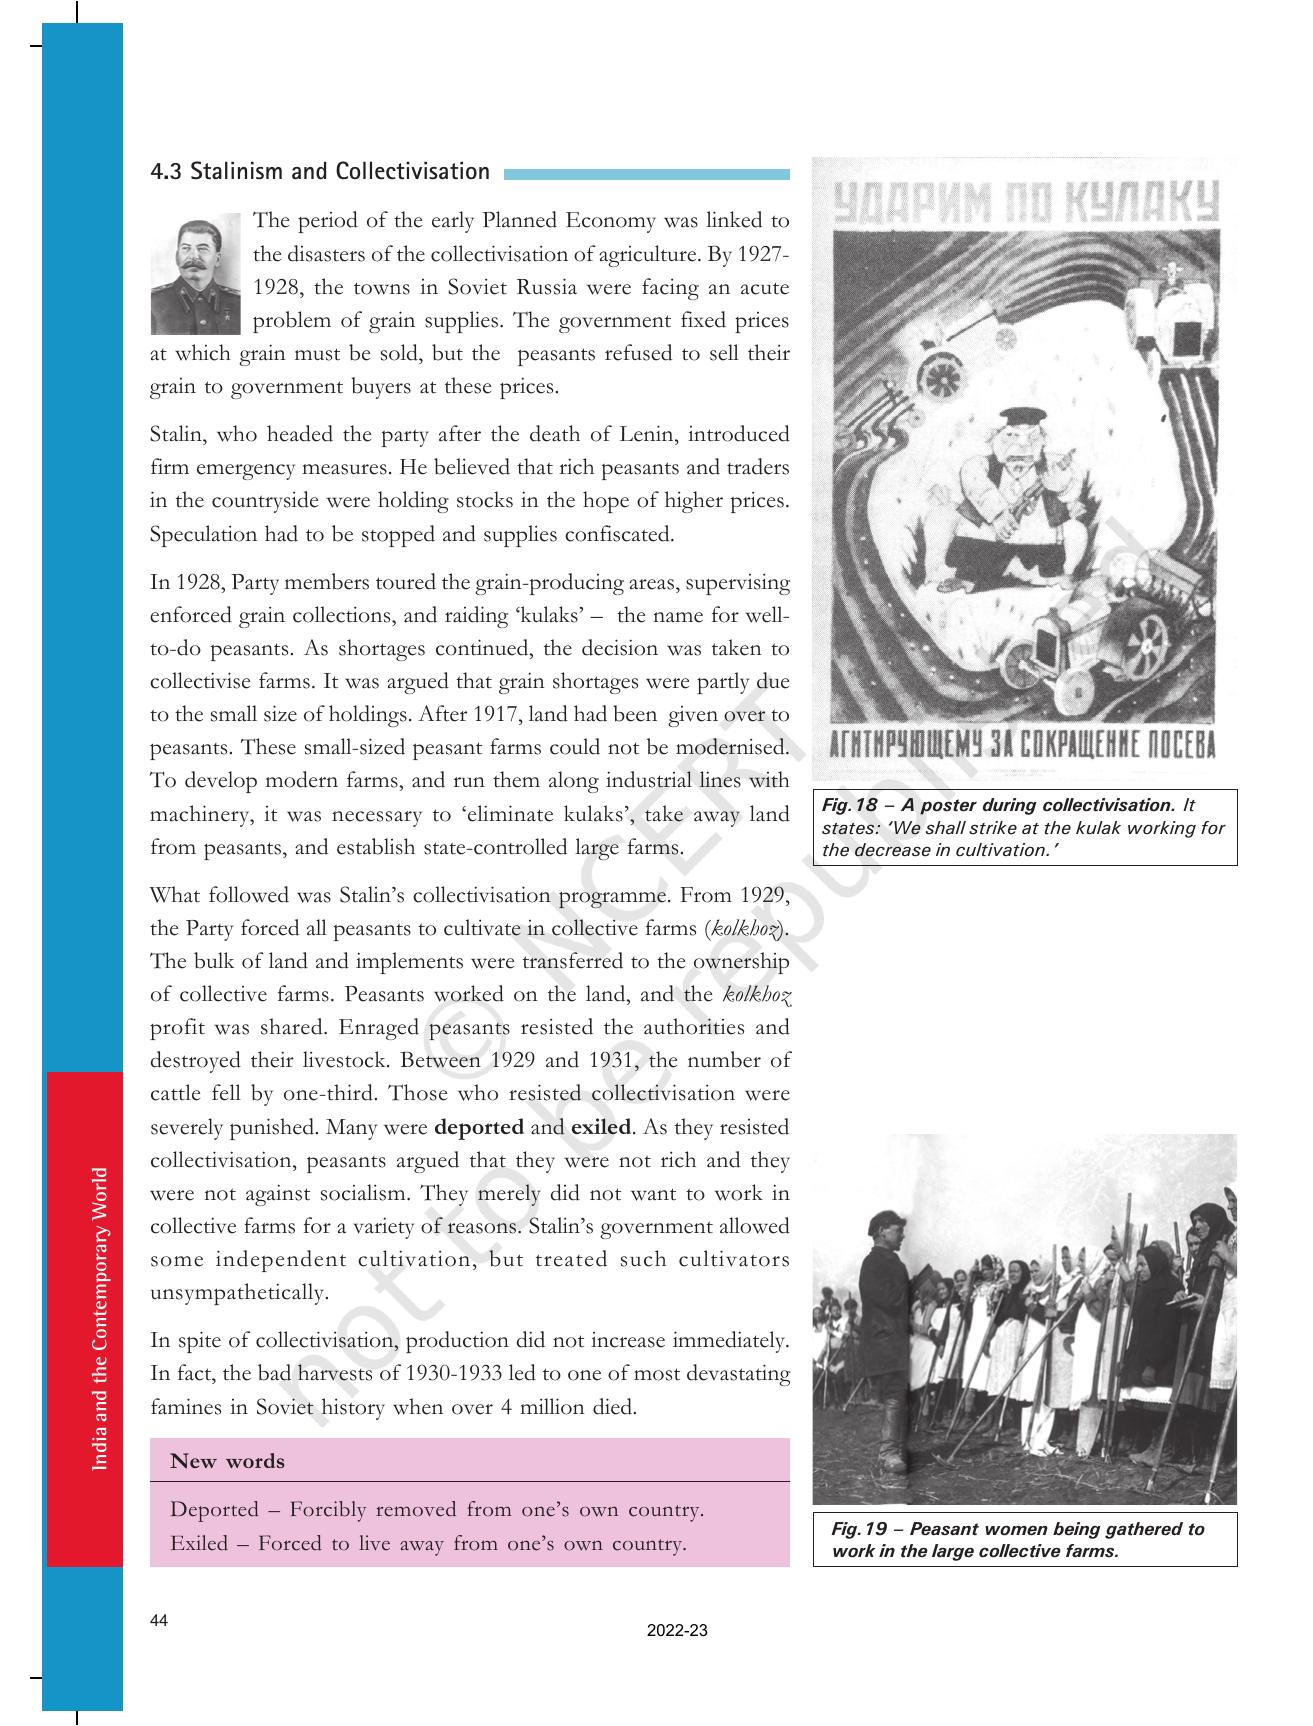 NCERT Book for Class 9 History Chapter 2 Socialism in Europe and the Russian Revolution - Page 20